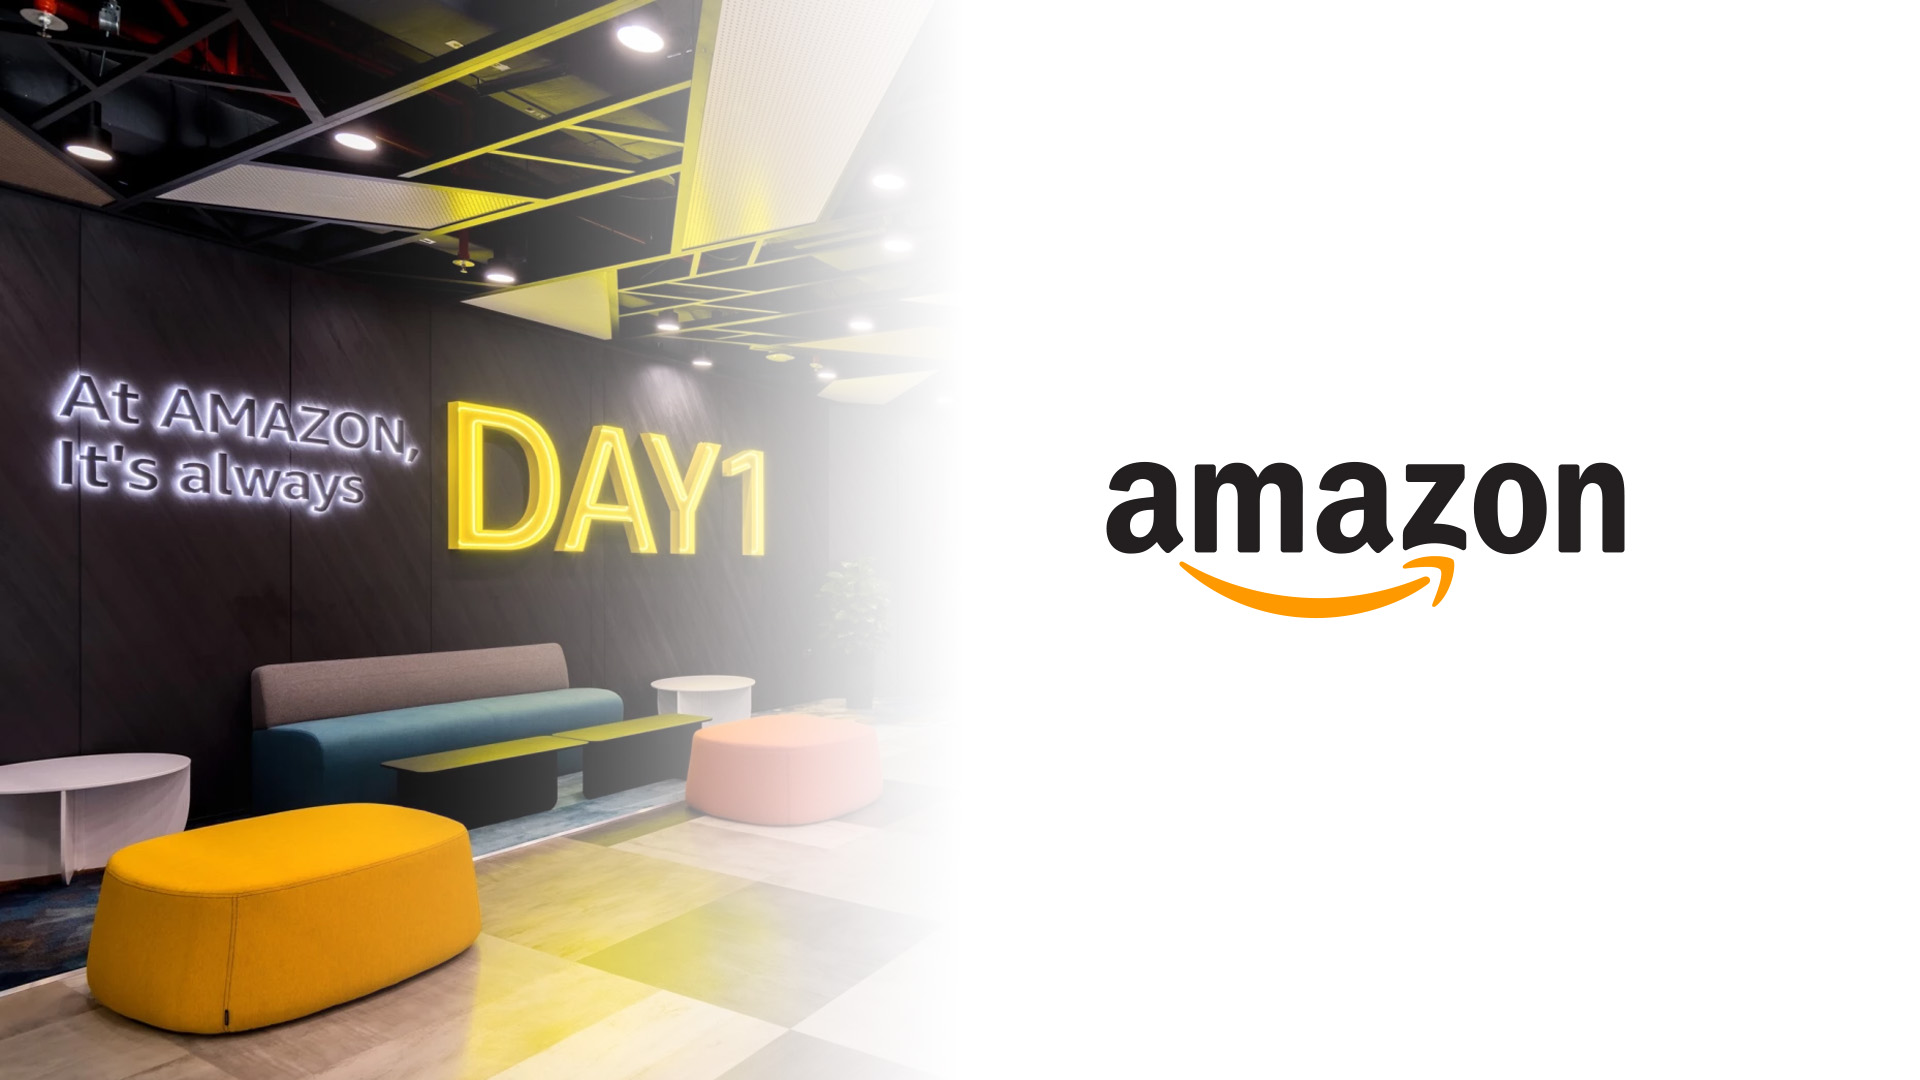 Amazon grows footprint in Singapore with new office launch